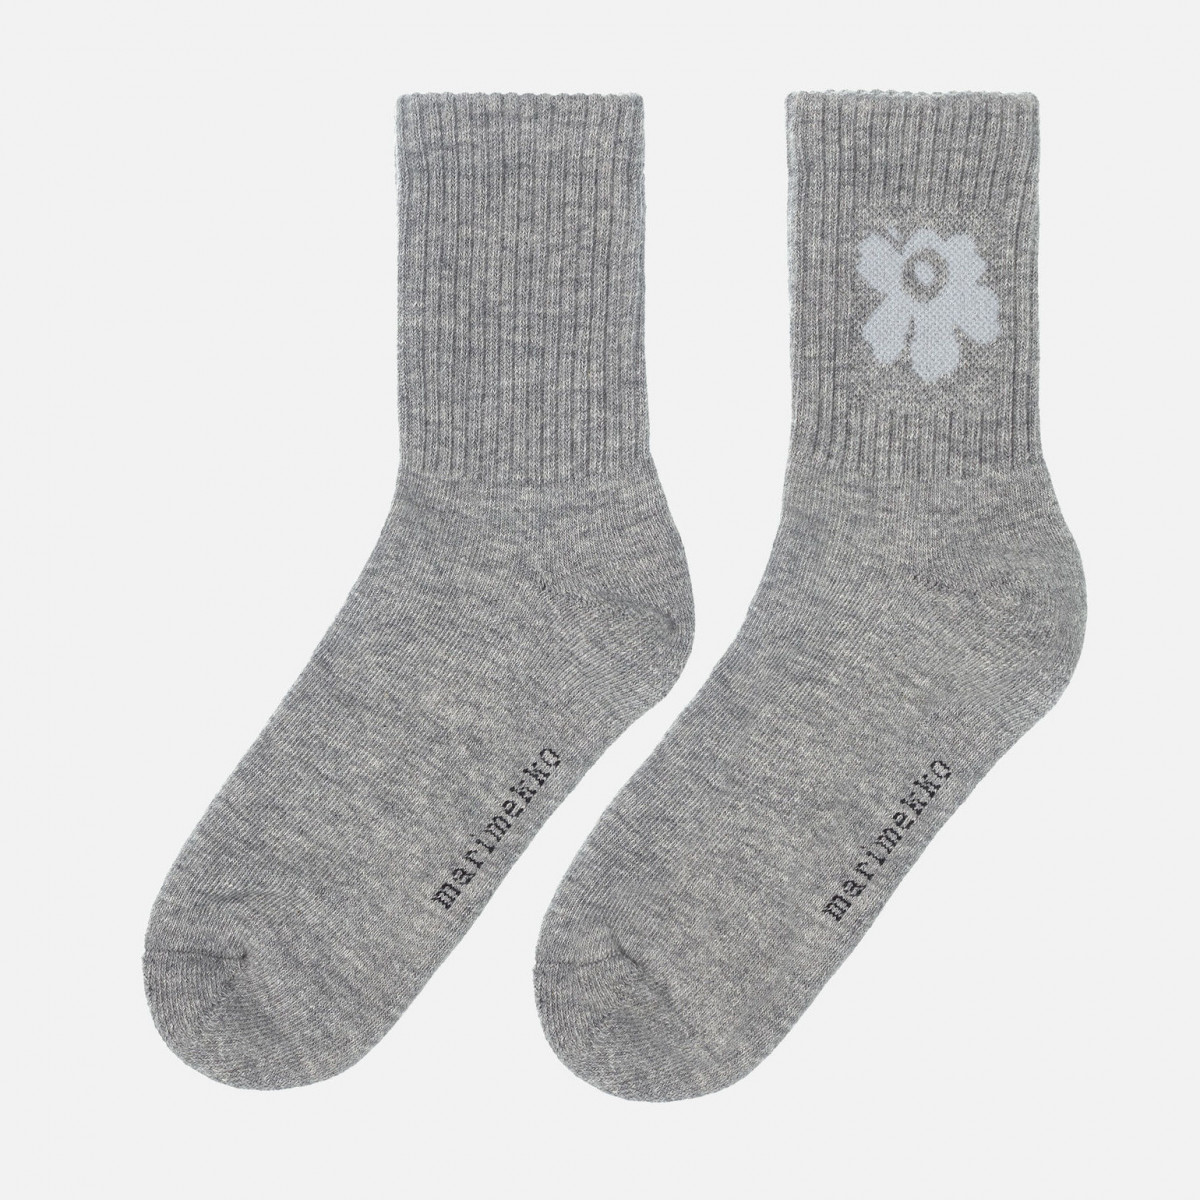 SOLD OUT - Puikea Unikko socks 099